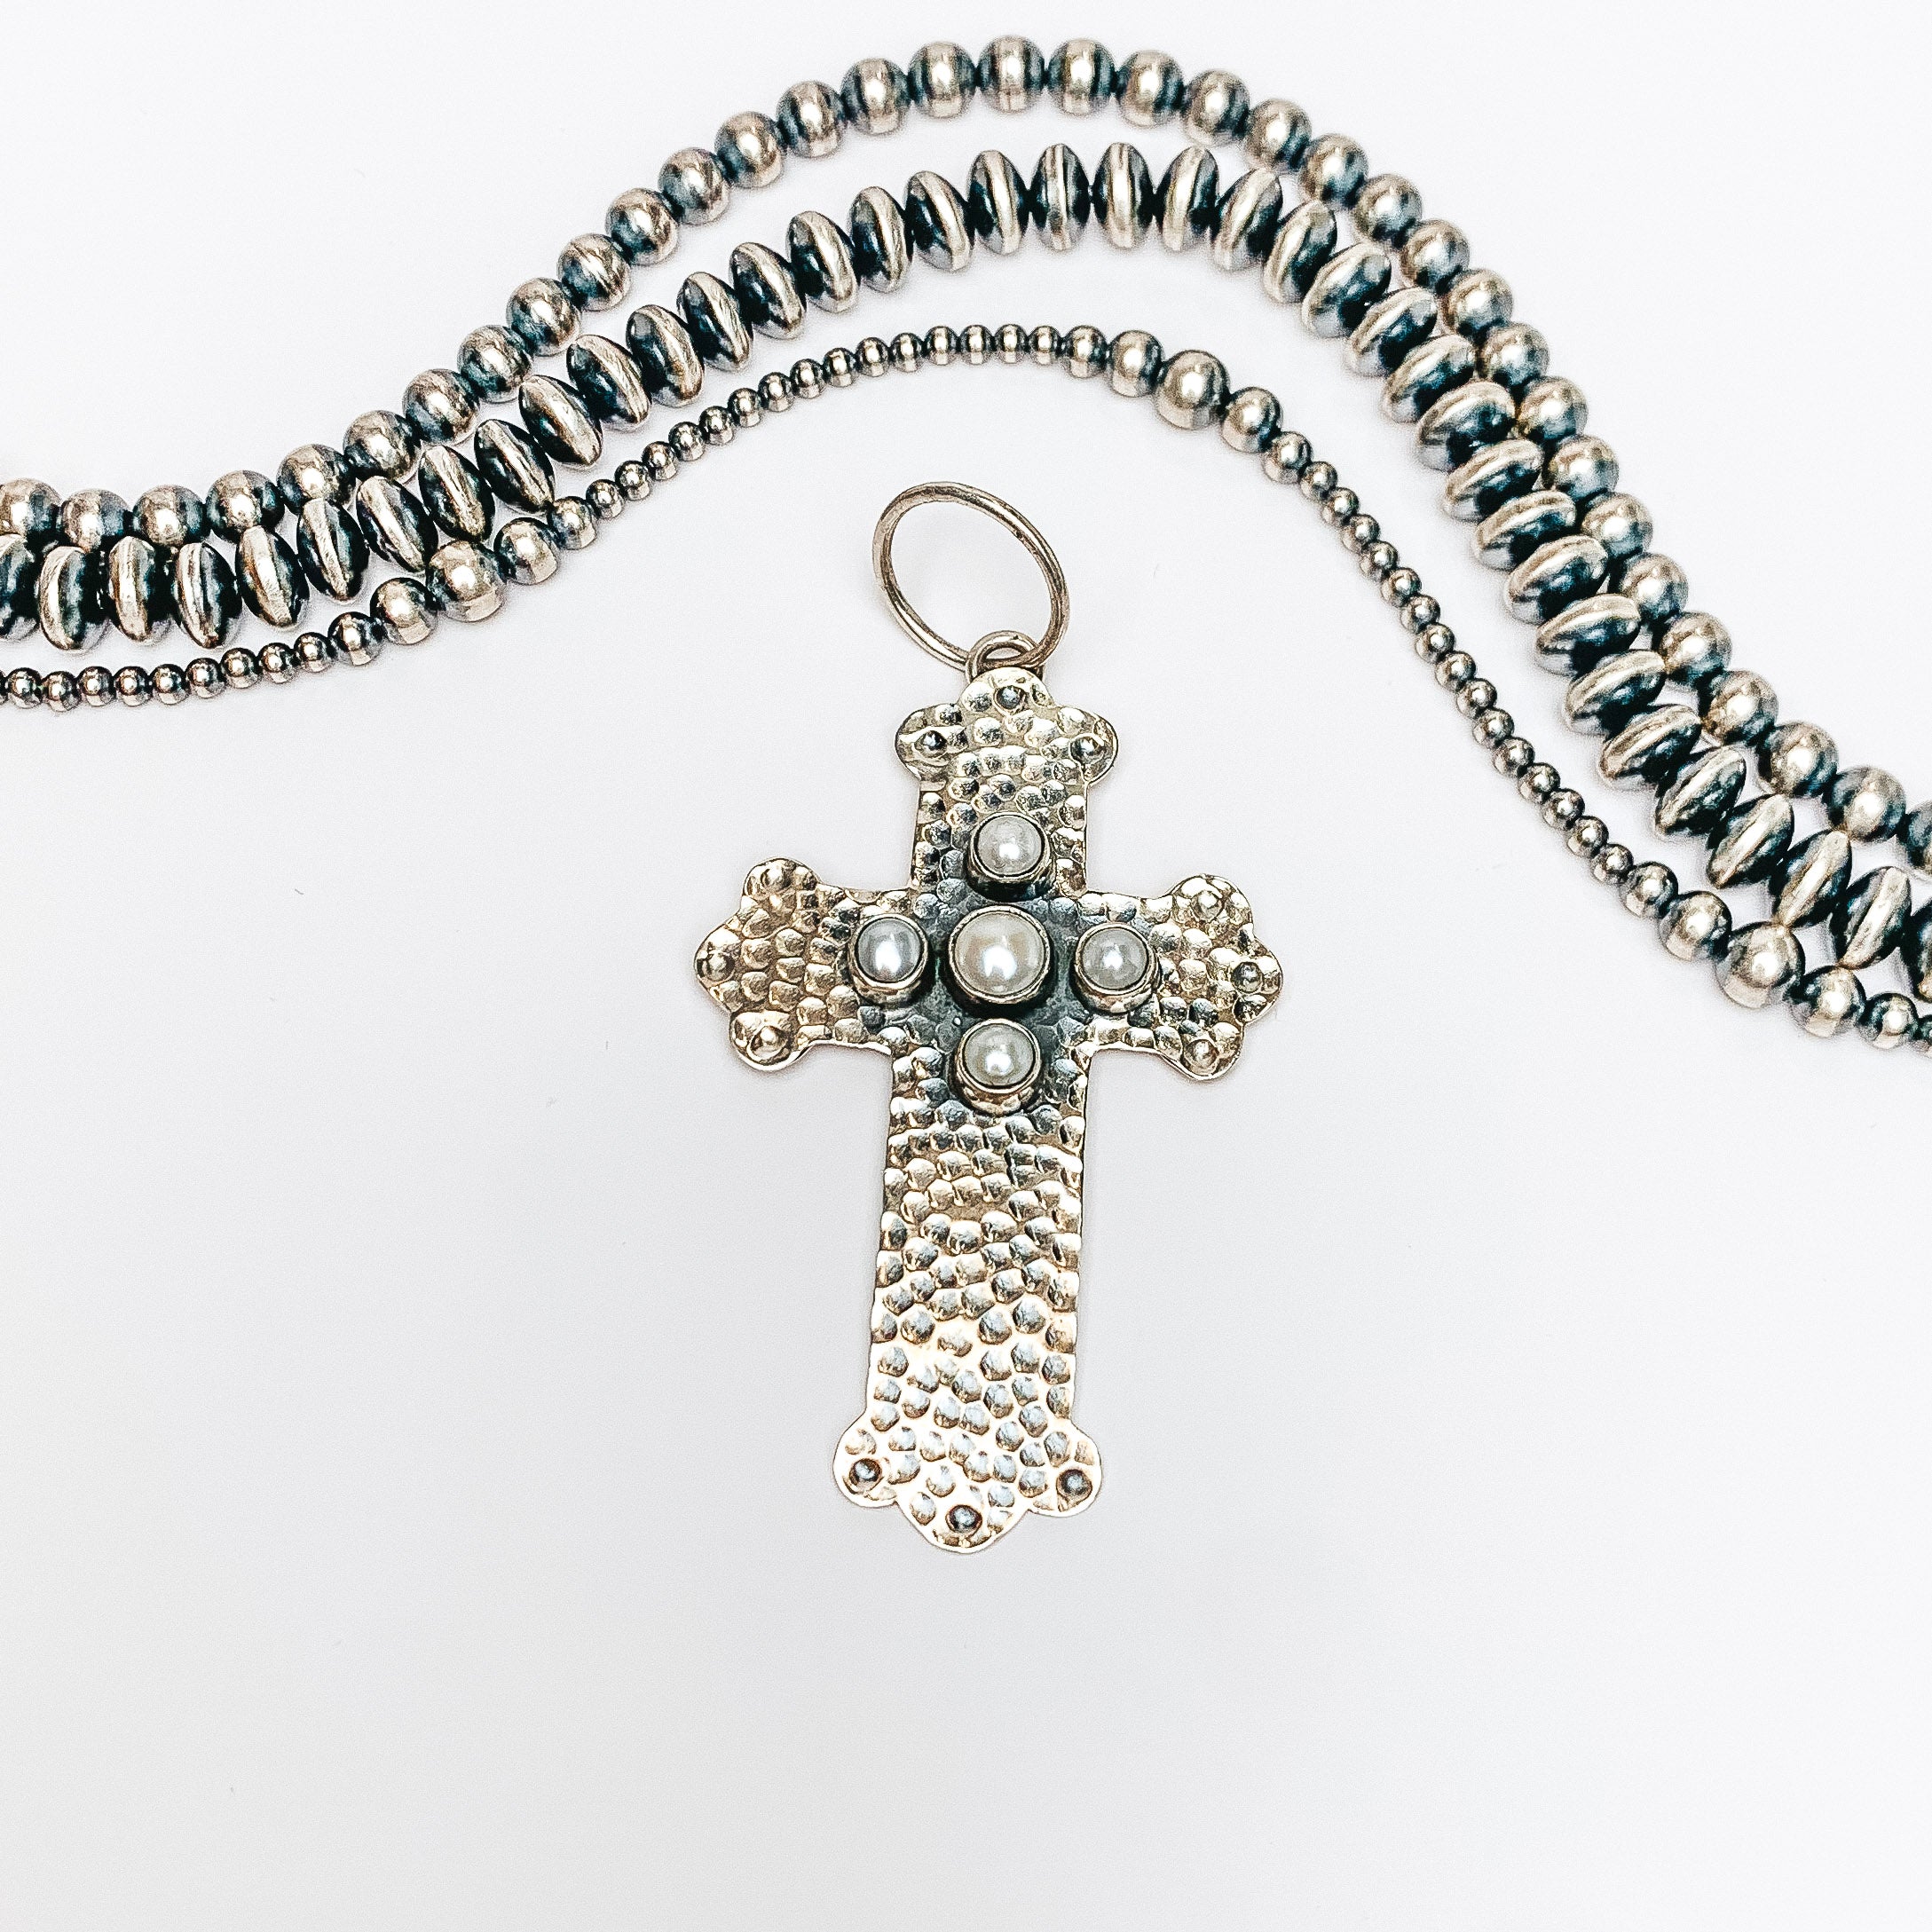 Centered in the picture is a hammered pattern cross pendant with 5 mother of pearl stones. Navajo pearls are laid above the cross, all on a white background. 